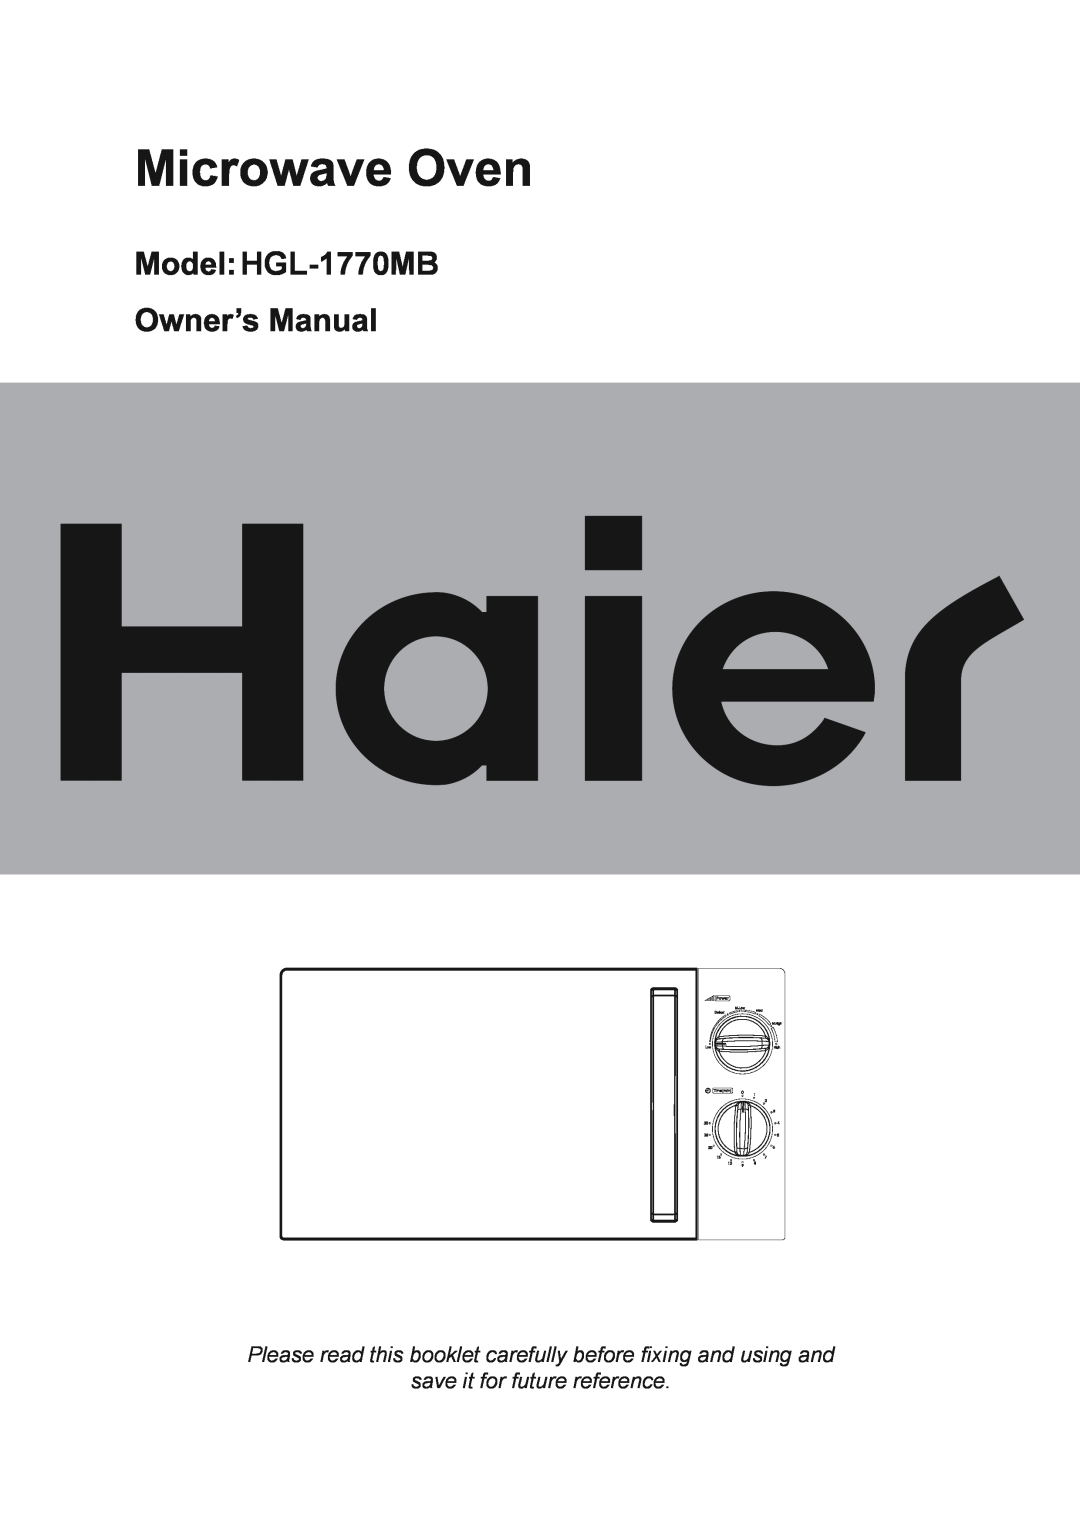 Haier HGL-1770MB manual Please read this booklet carefully before fixing and using and, save it for future reference 